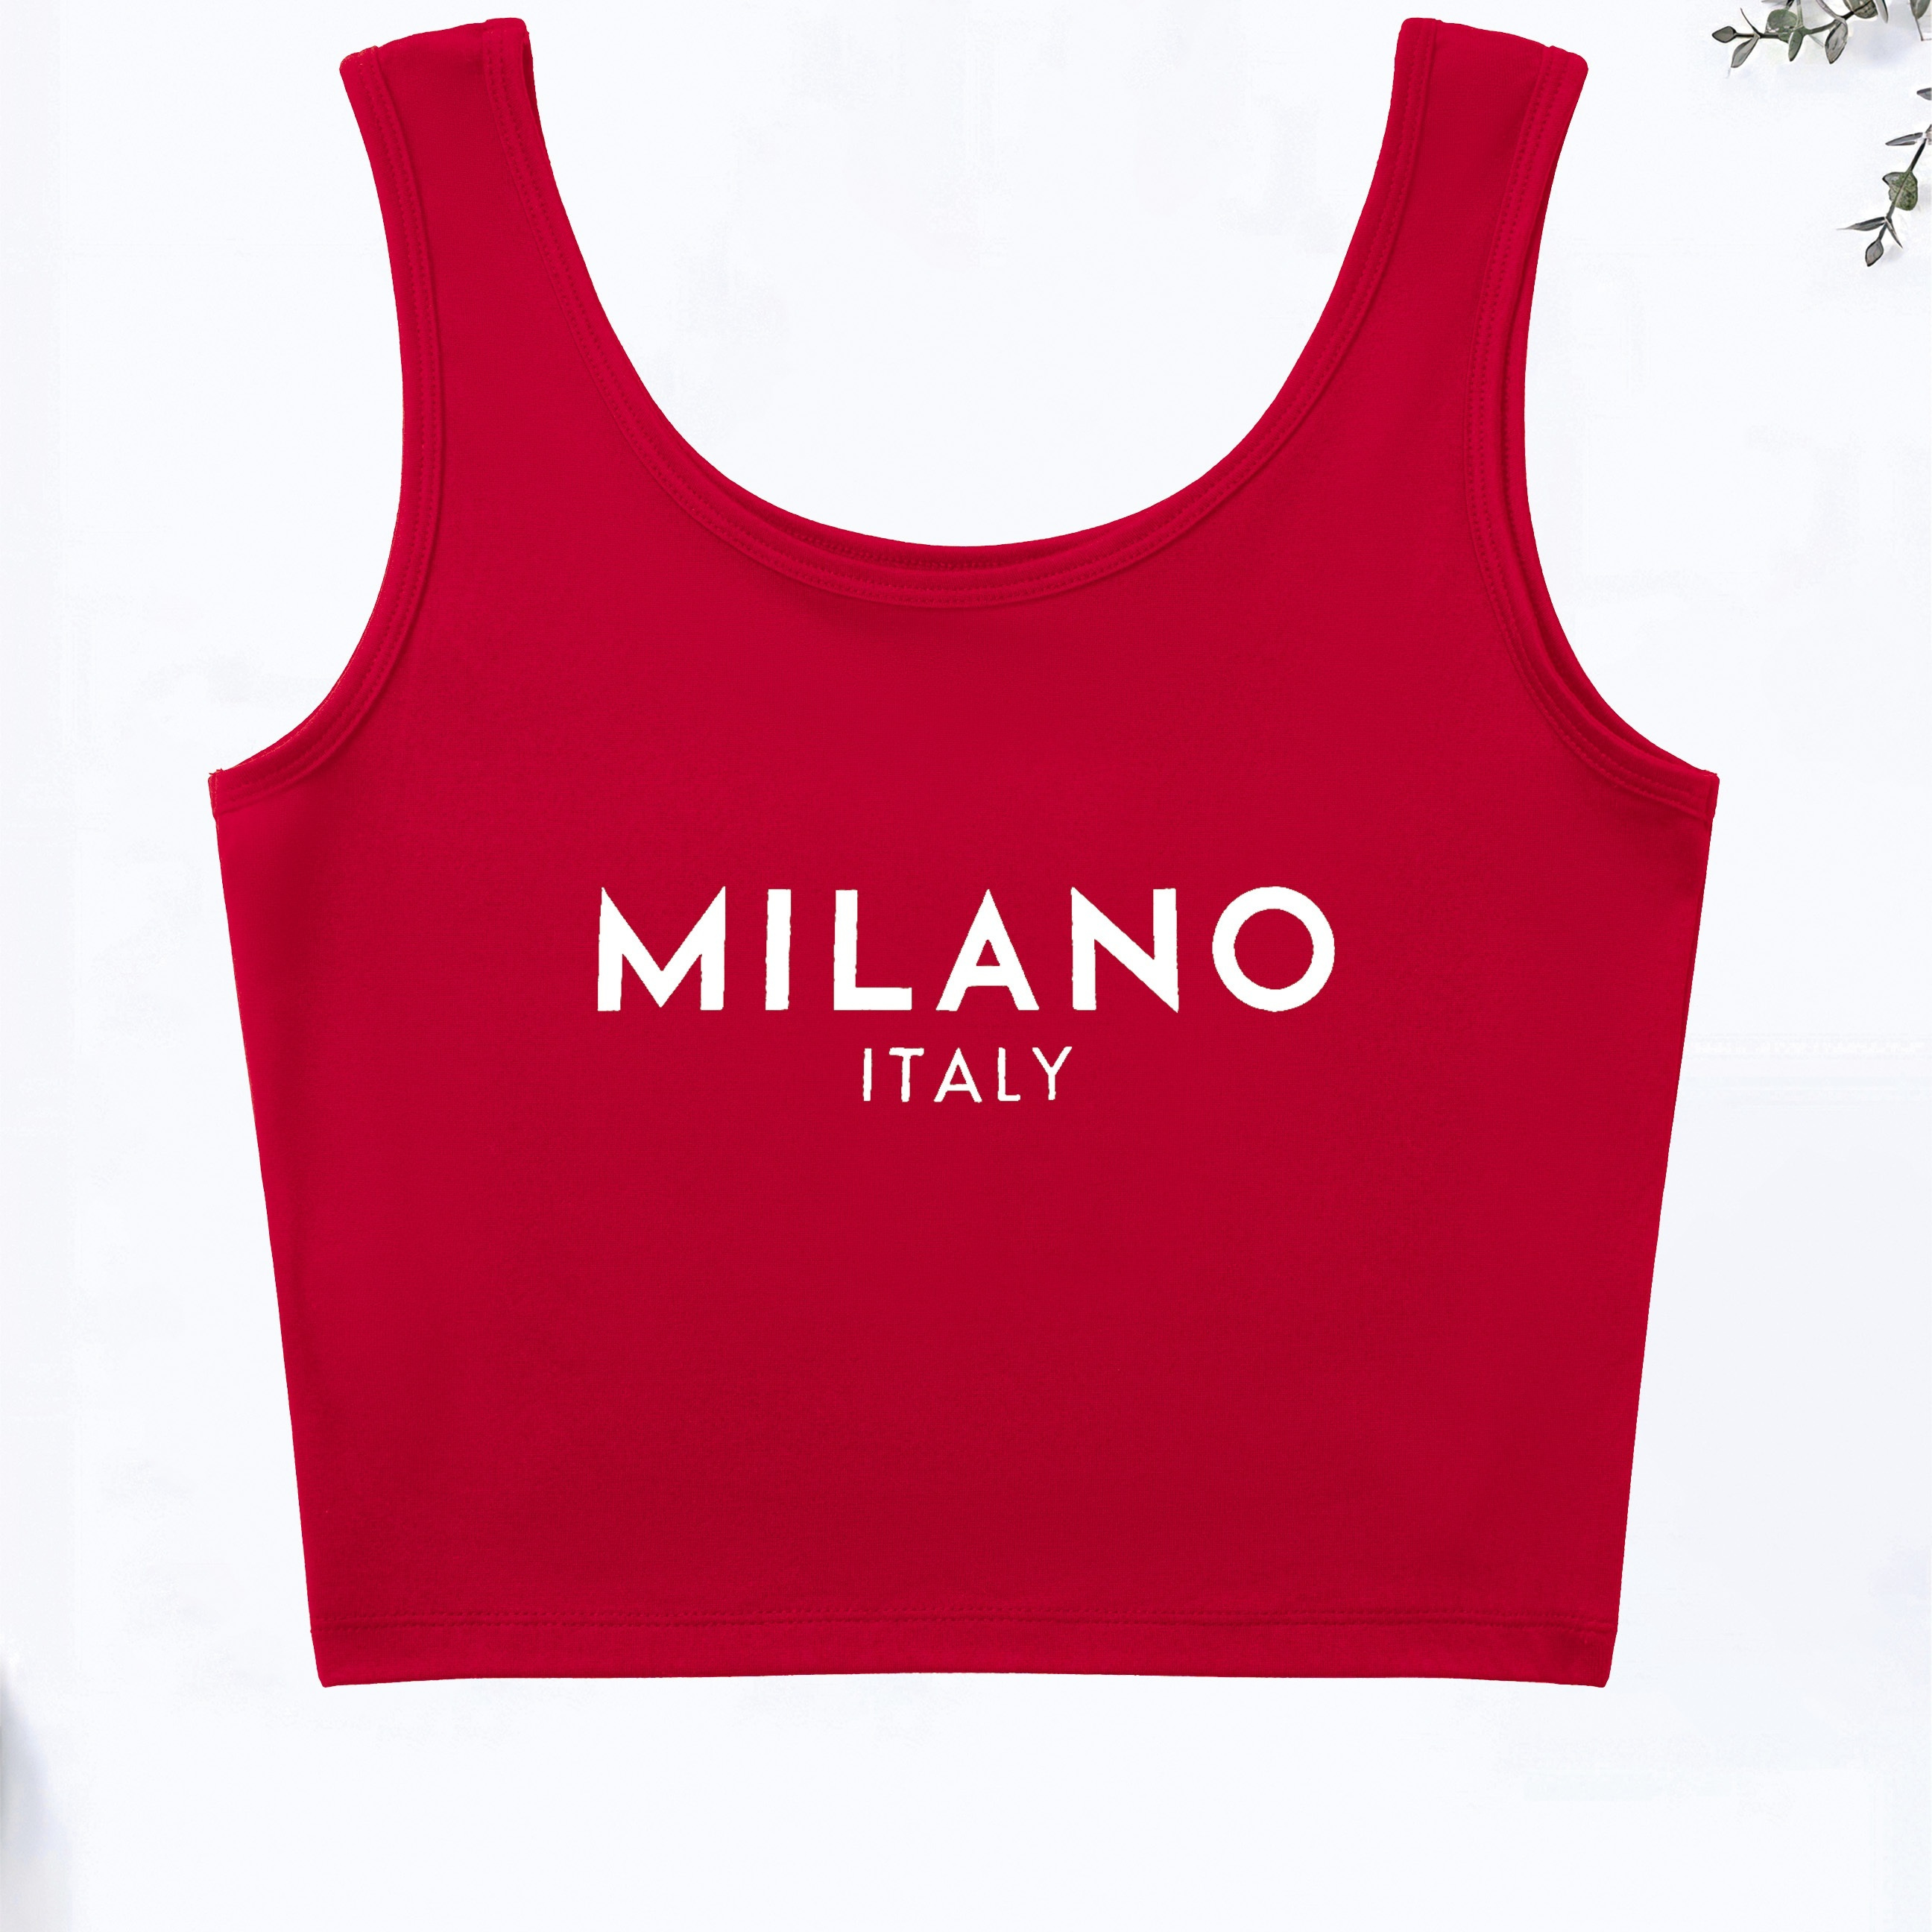 

Italy Milano Letter Print Tank Top, Sleeveless Casual Top For Summer & Spring, Women's Clothing